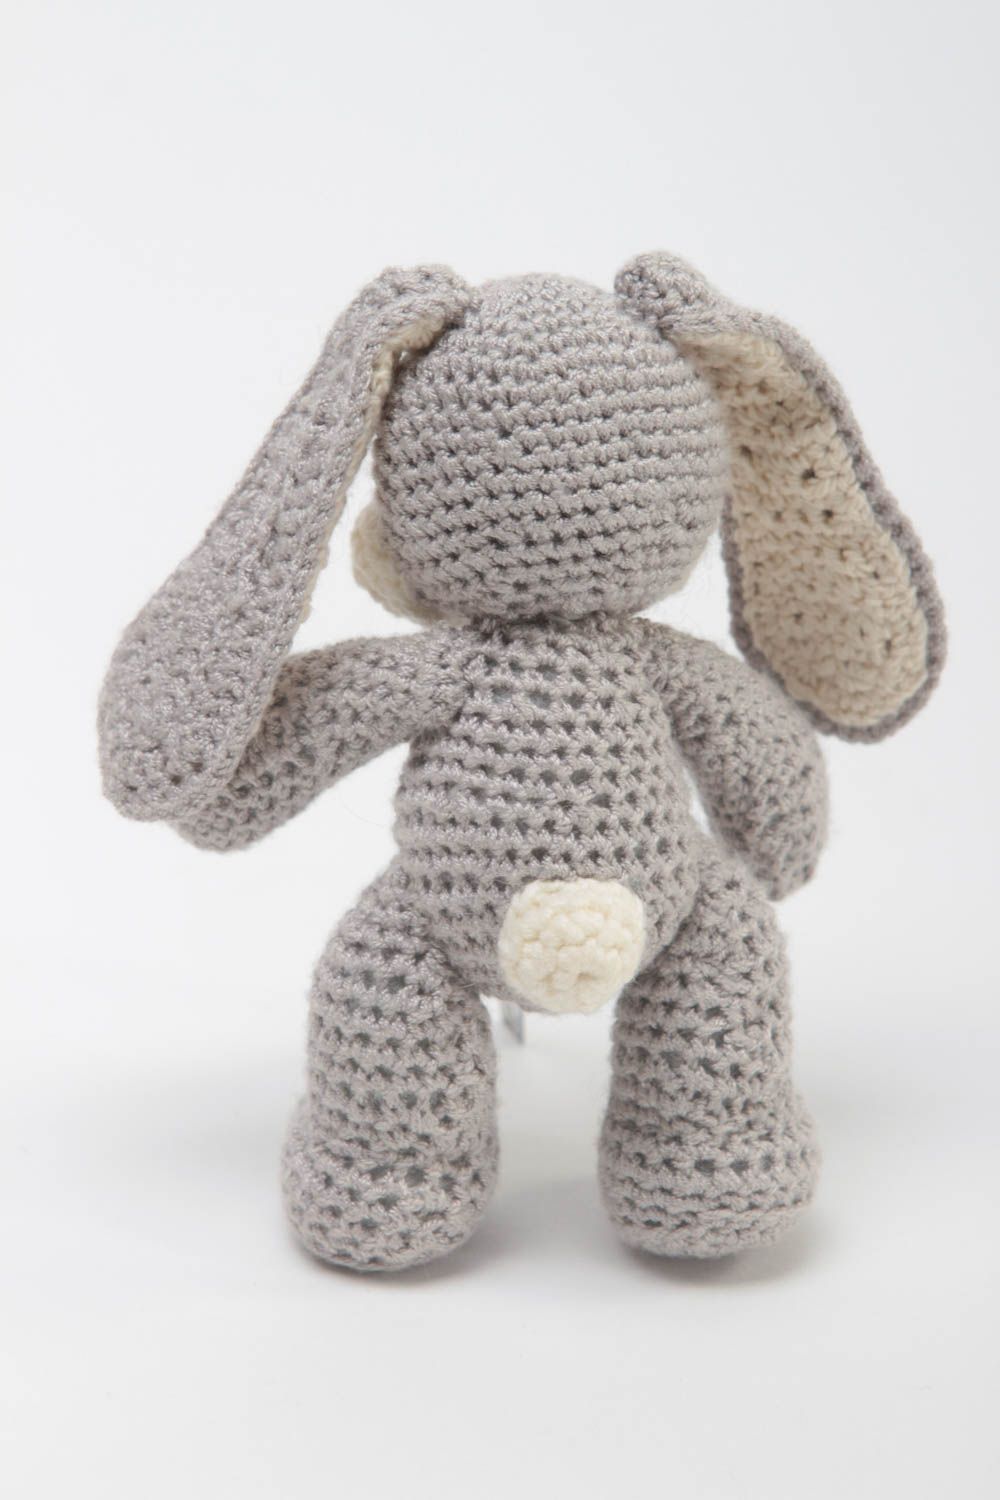 Unusual handmade soft toy crochet stuffed toy hare best toys for kids photo 3